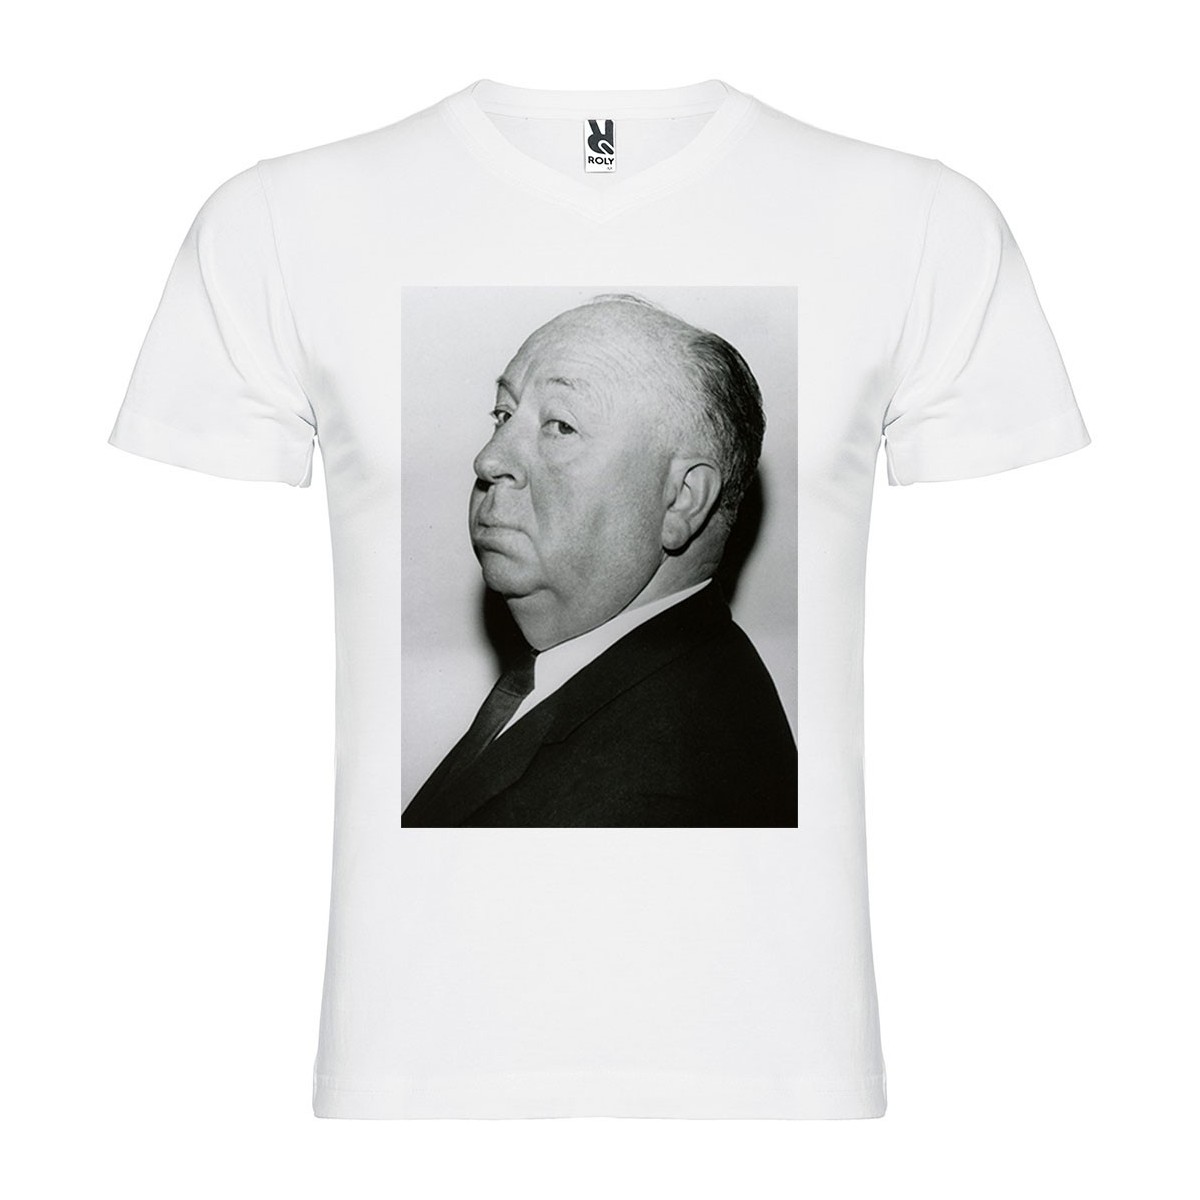 T-Shirt Alfred Hitchcock - col v homme blanc